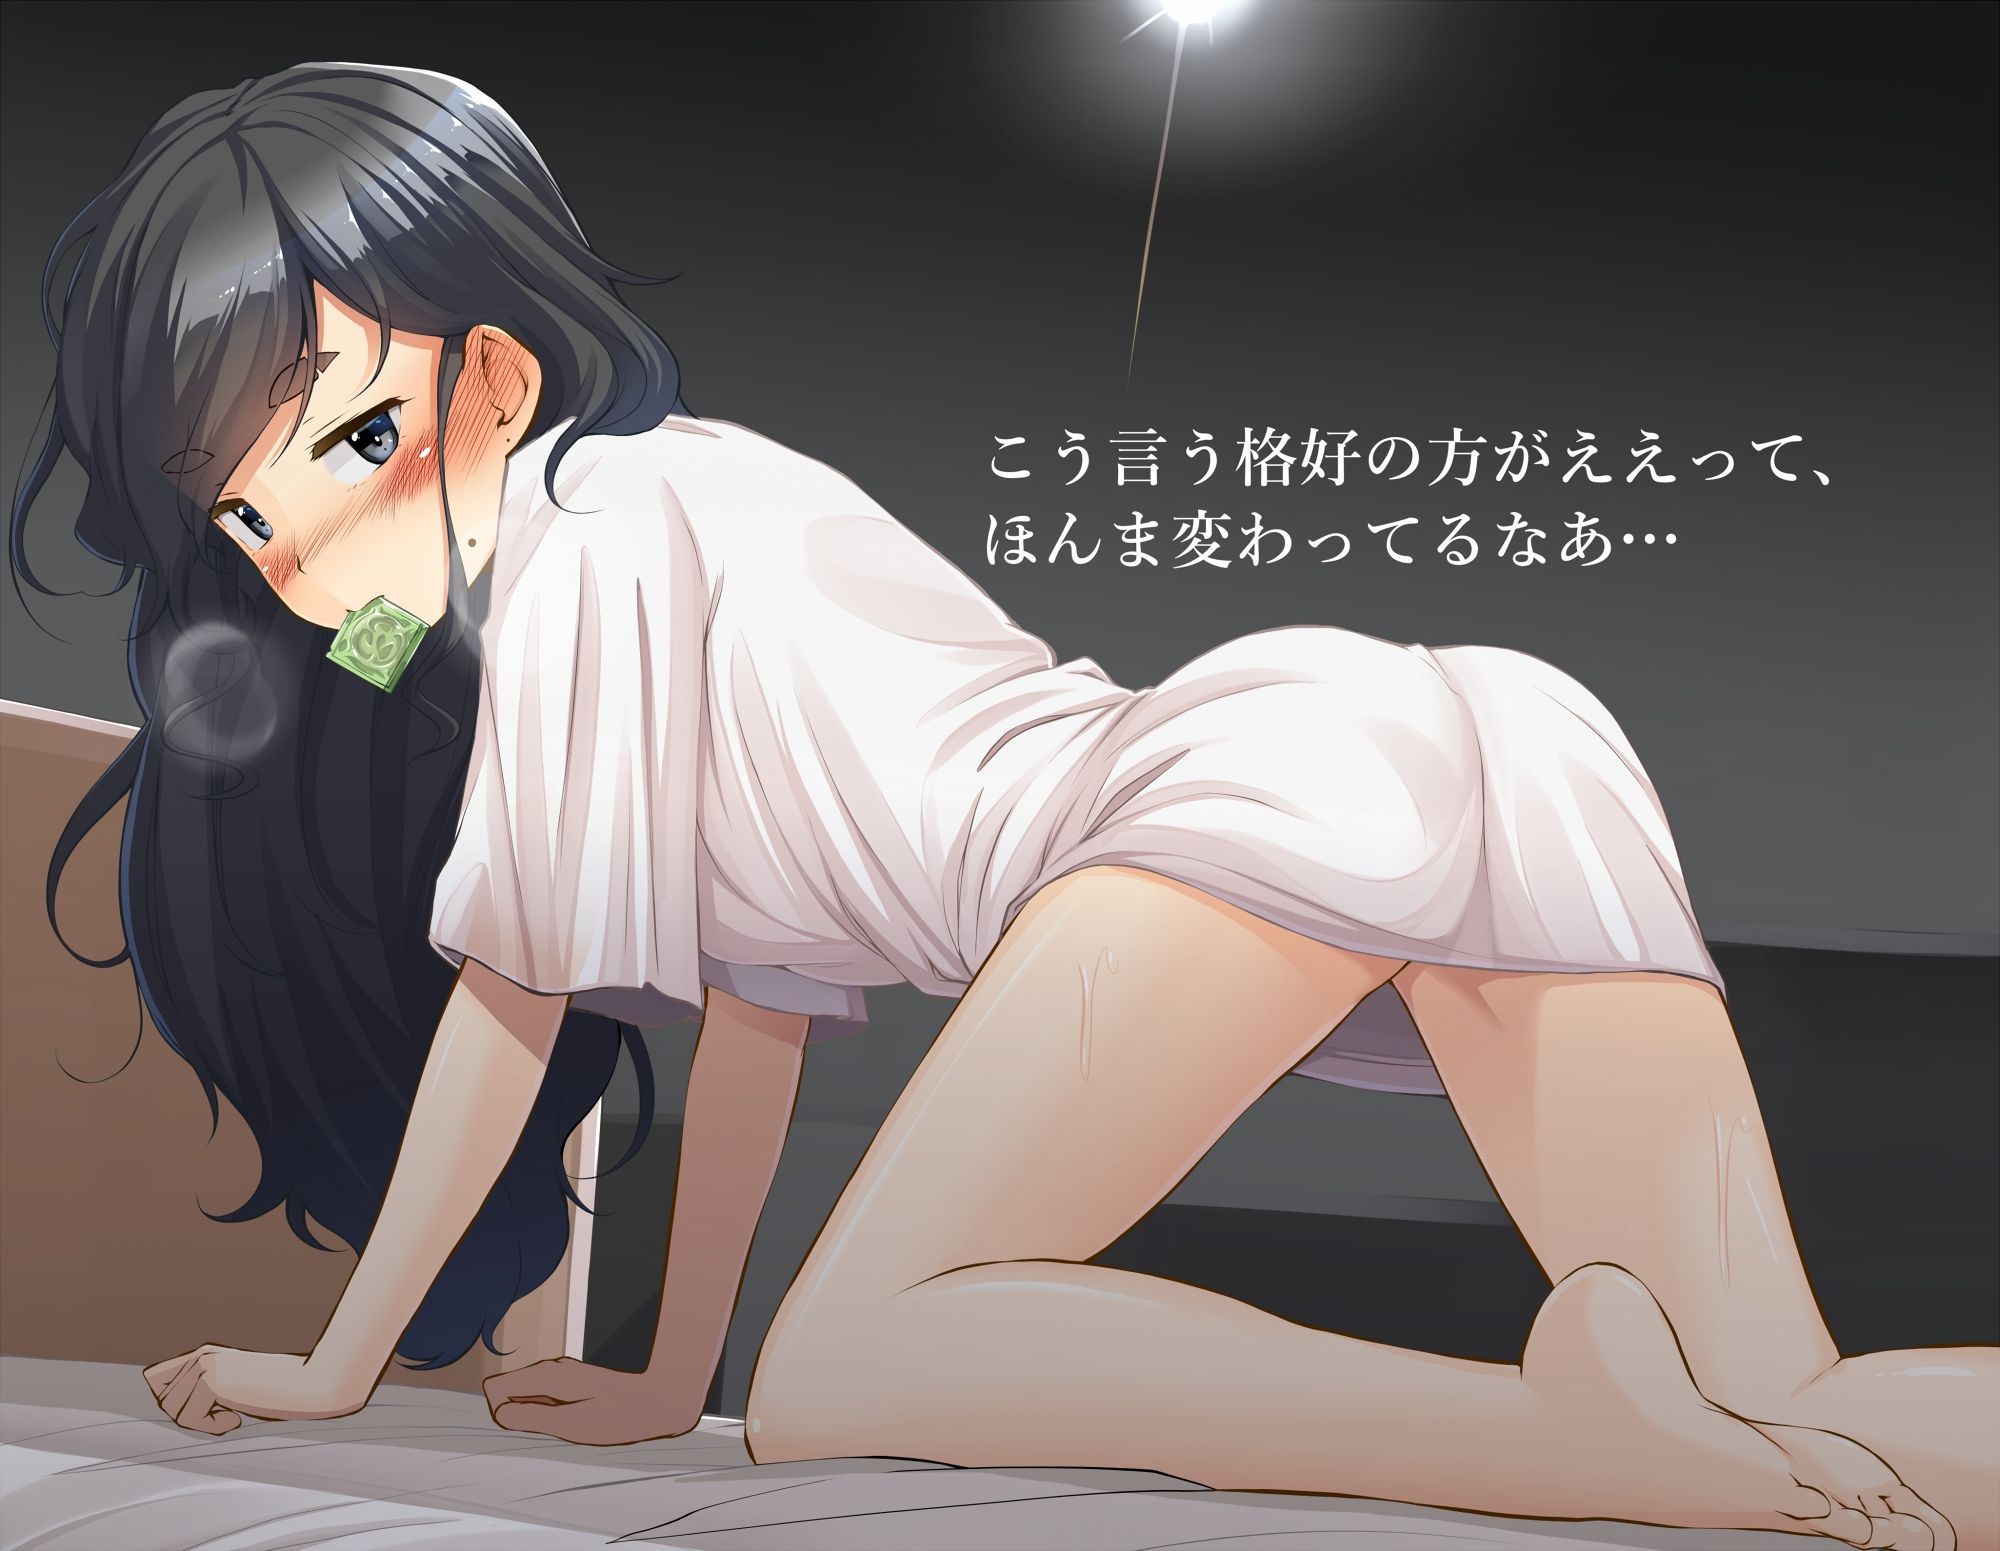 Beautiful girl 2nd image of all fours become want to be attacked [secondary, ZIP] 21